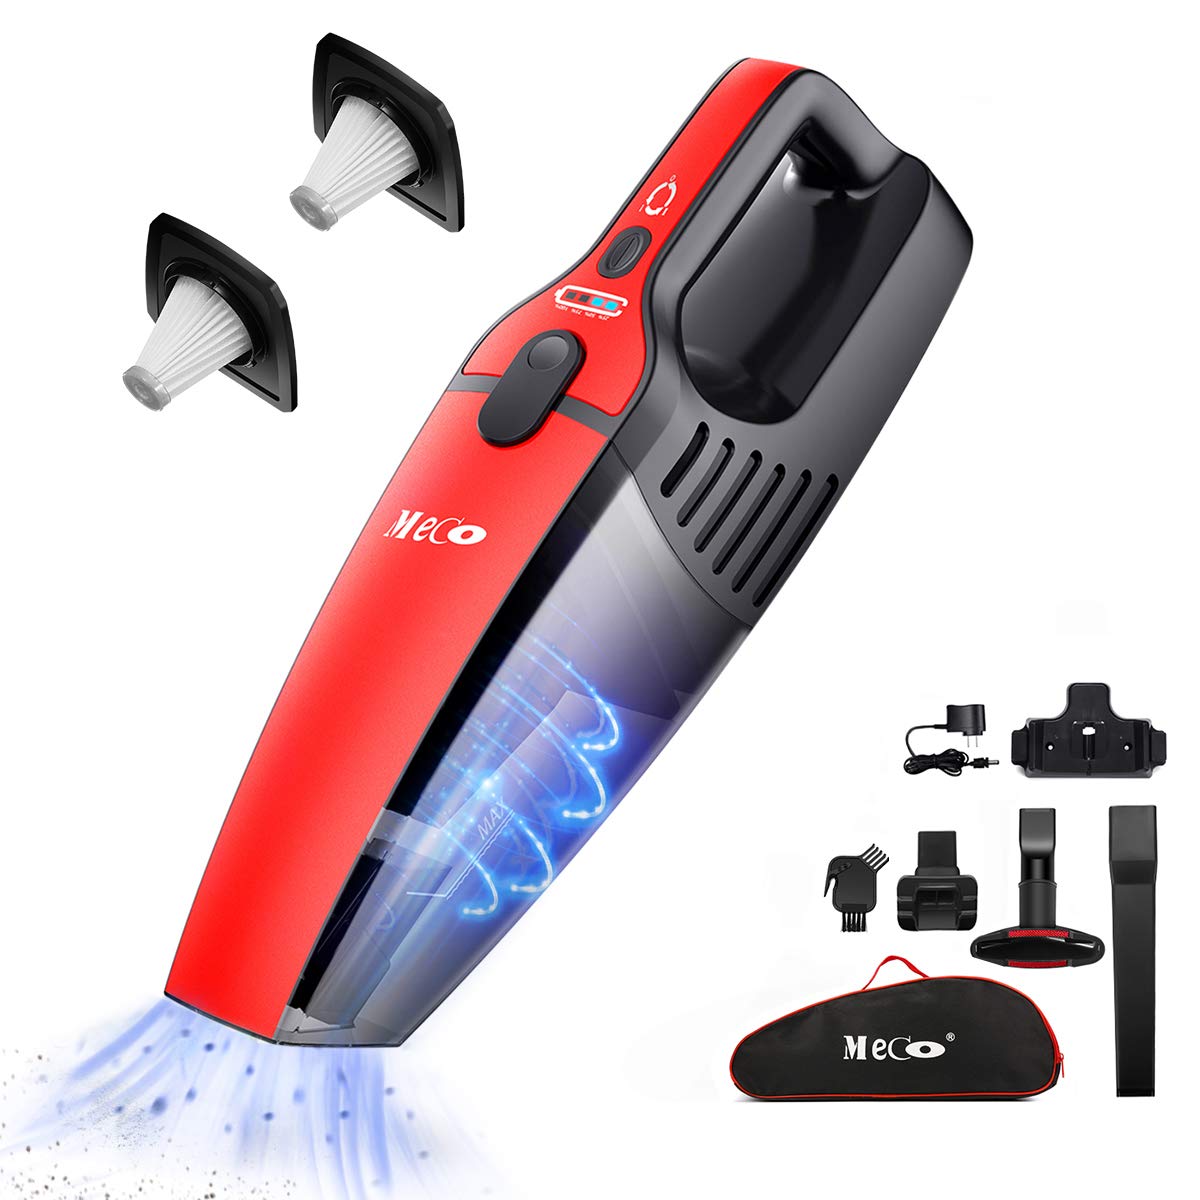 Book Cover Handheld Vacuum Cordless, MECO Cordless Vacuum Rechargeable Wet and Dry 800ml Dust Box Two Speeds Adjustable, Dual Filter, Carrying Bag Included for Car Home Pet Hair